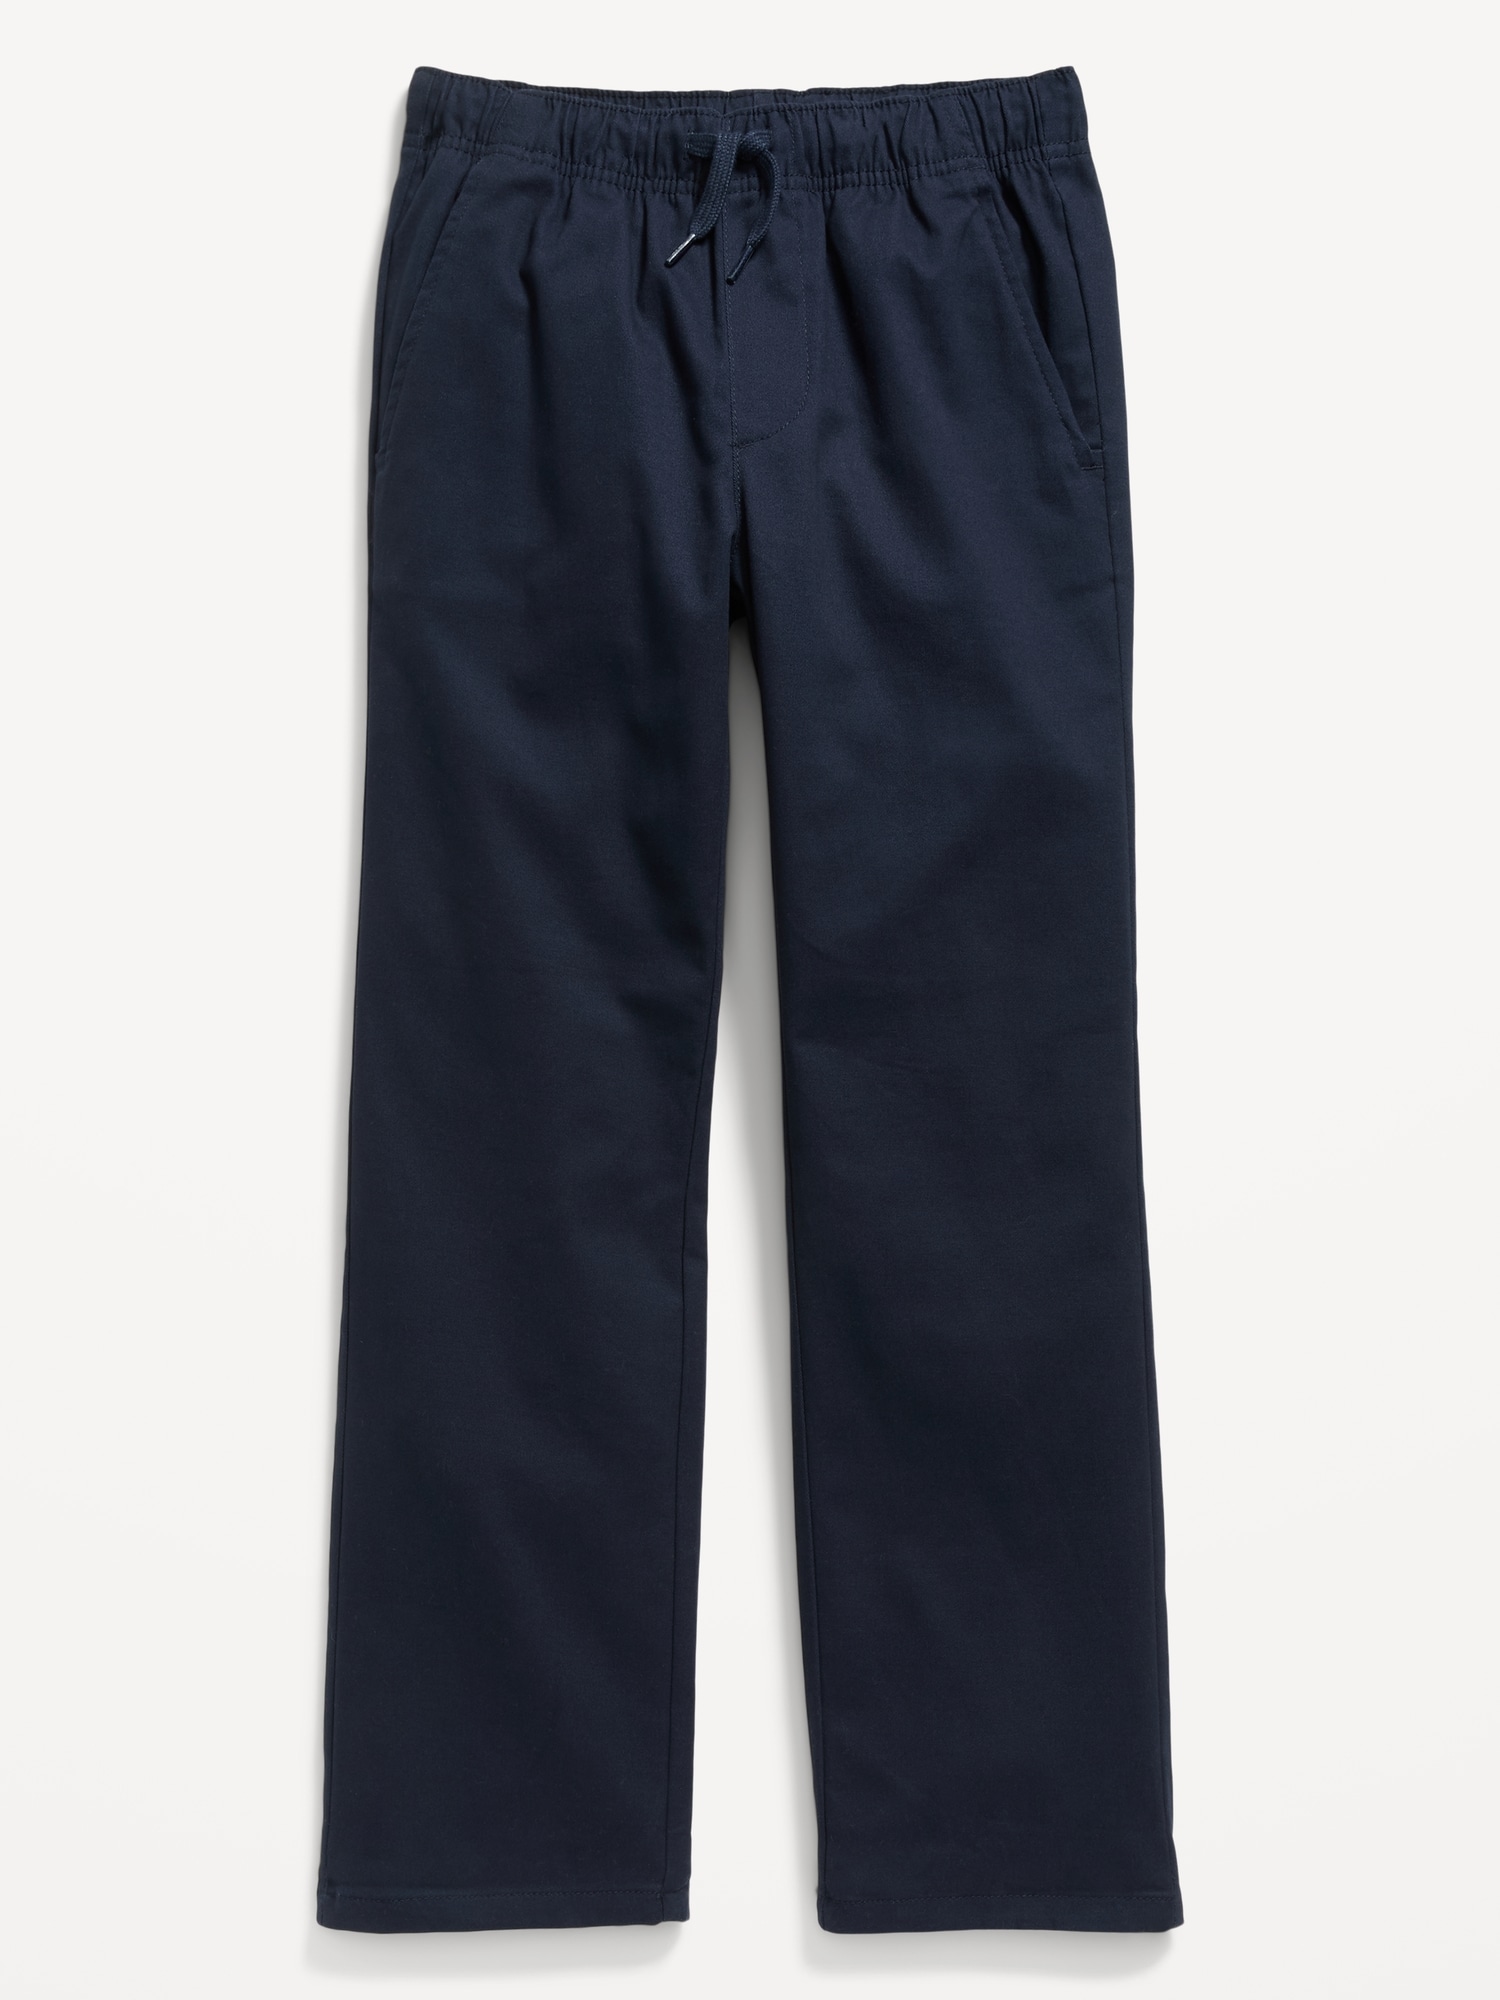 Straight Built-In Flex Pull-On Pants for Boys | Old Navy